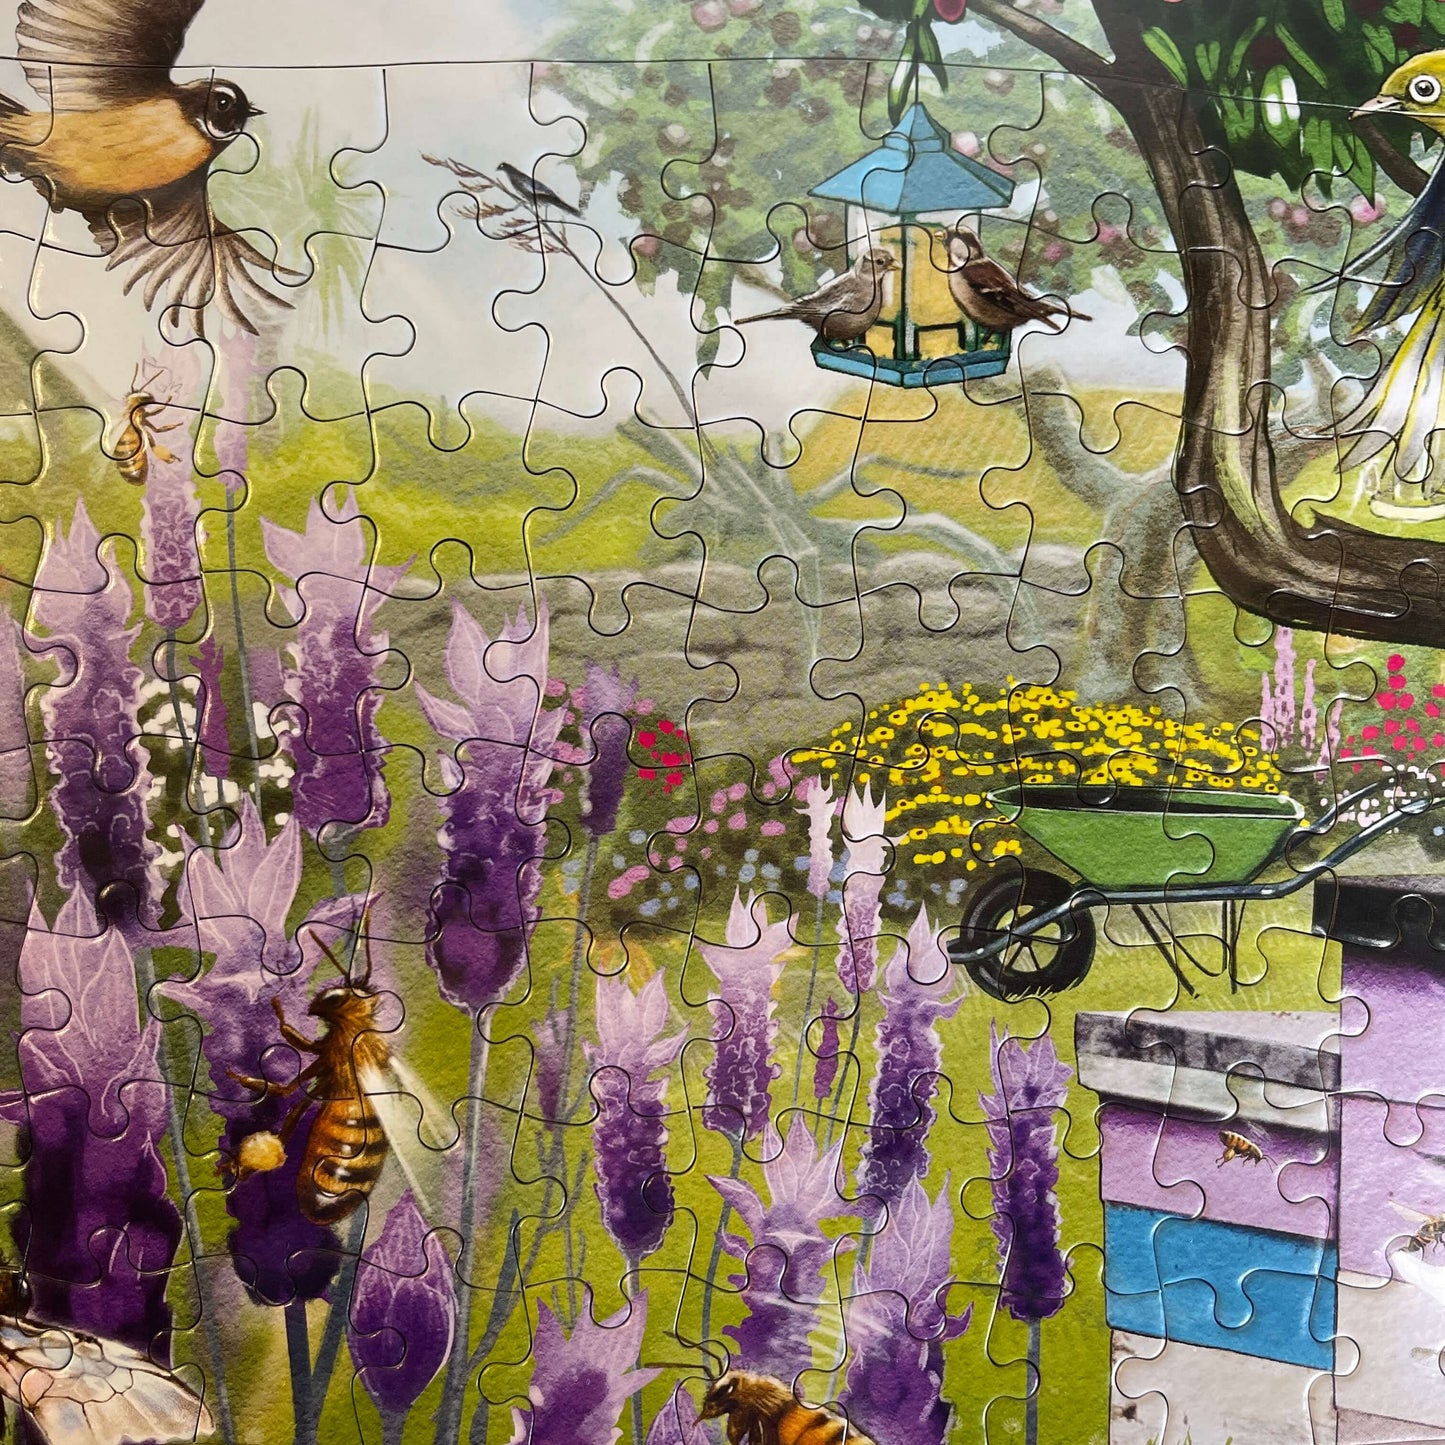 Jigsaw puzzle featuring beehives and native NZ birds.